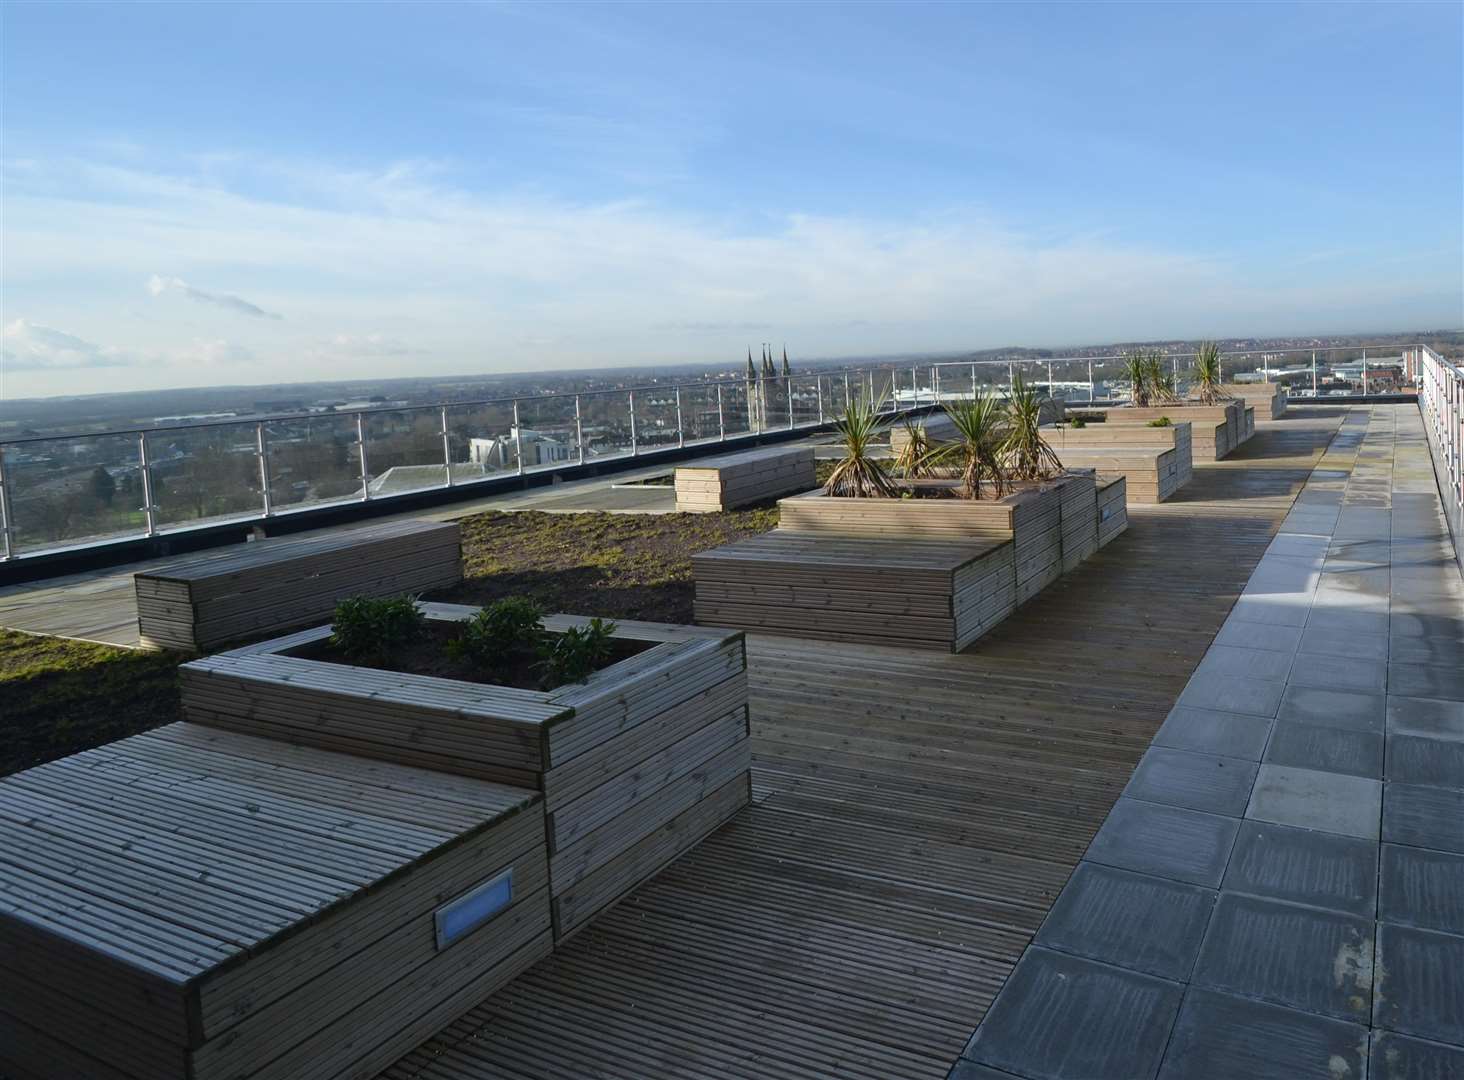 The rooftop garden on top of The Panorama could be lost. Picture: Steve Salter